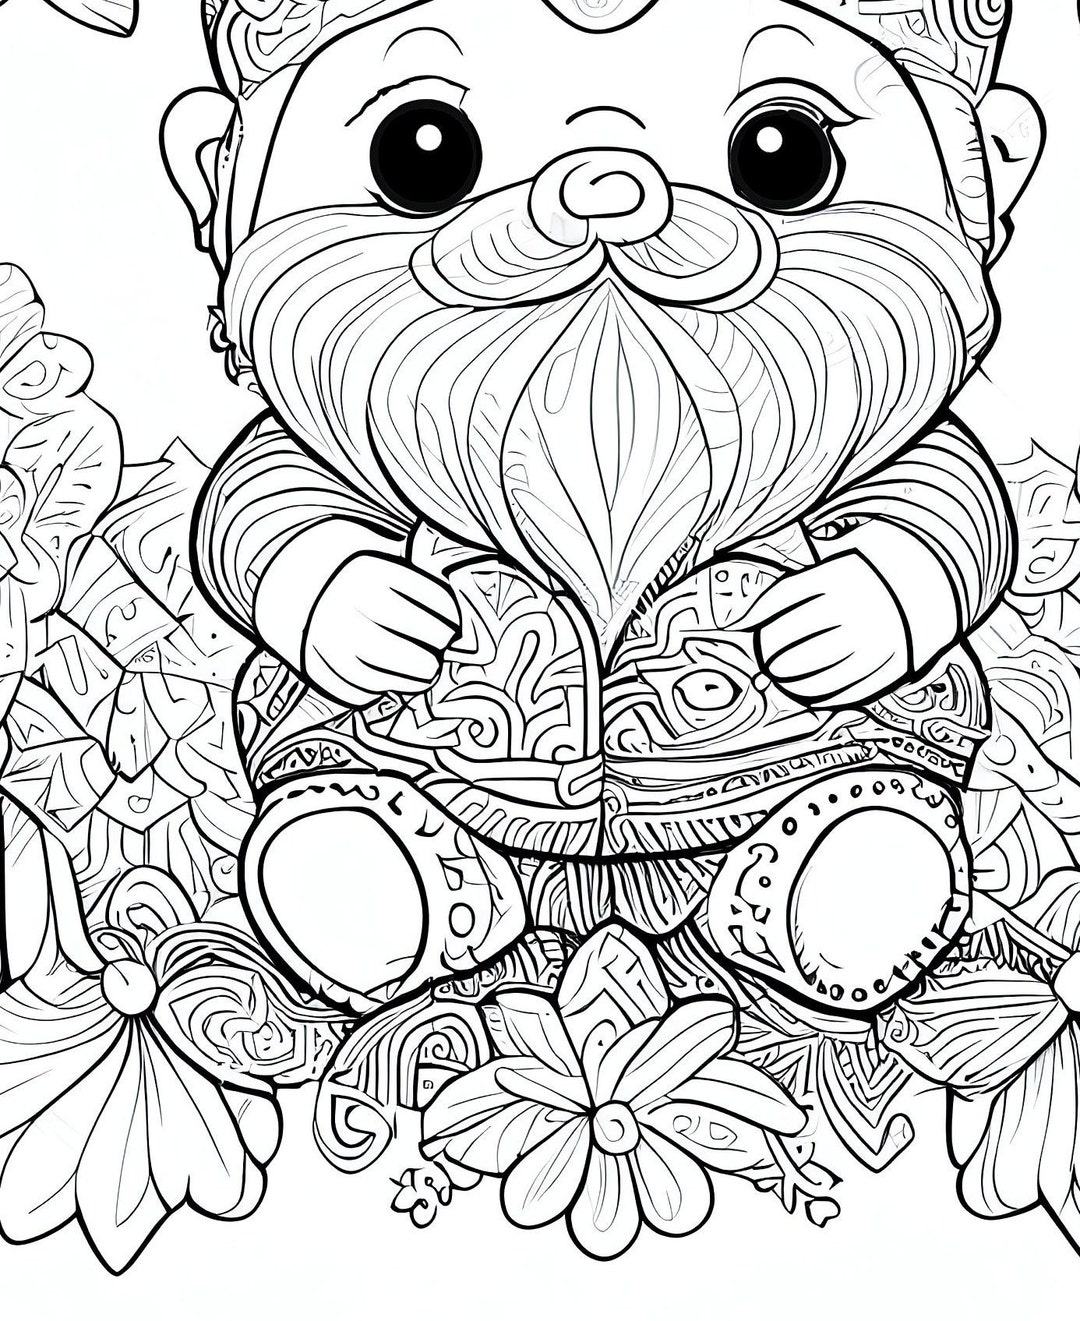 12 Pack Stress Relief Coloring Pages, Cute Fox Digital Print